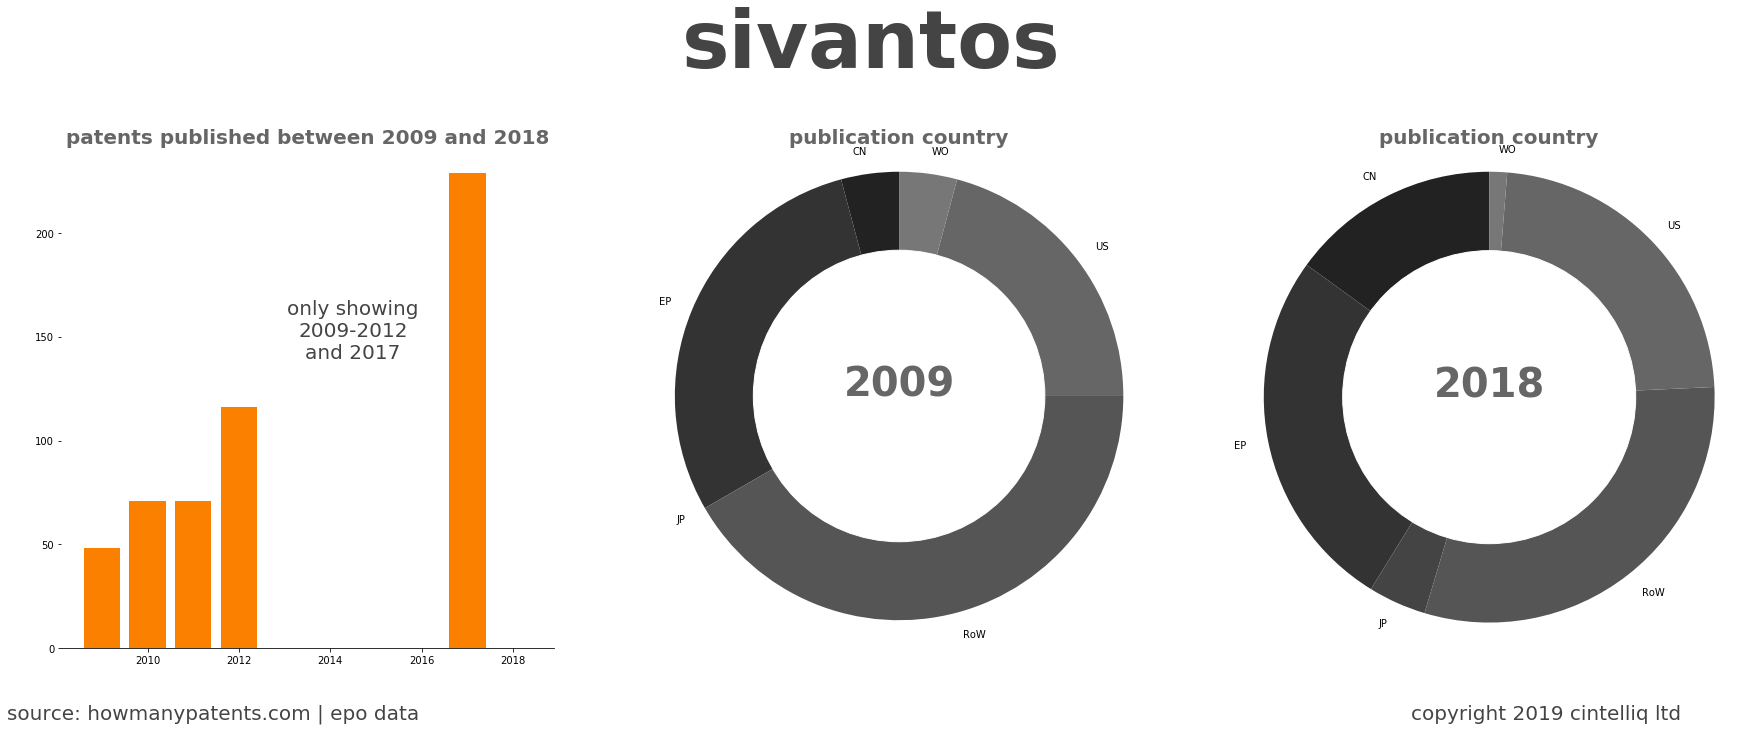 summary of patents for Sivantos